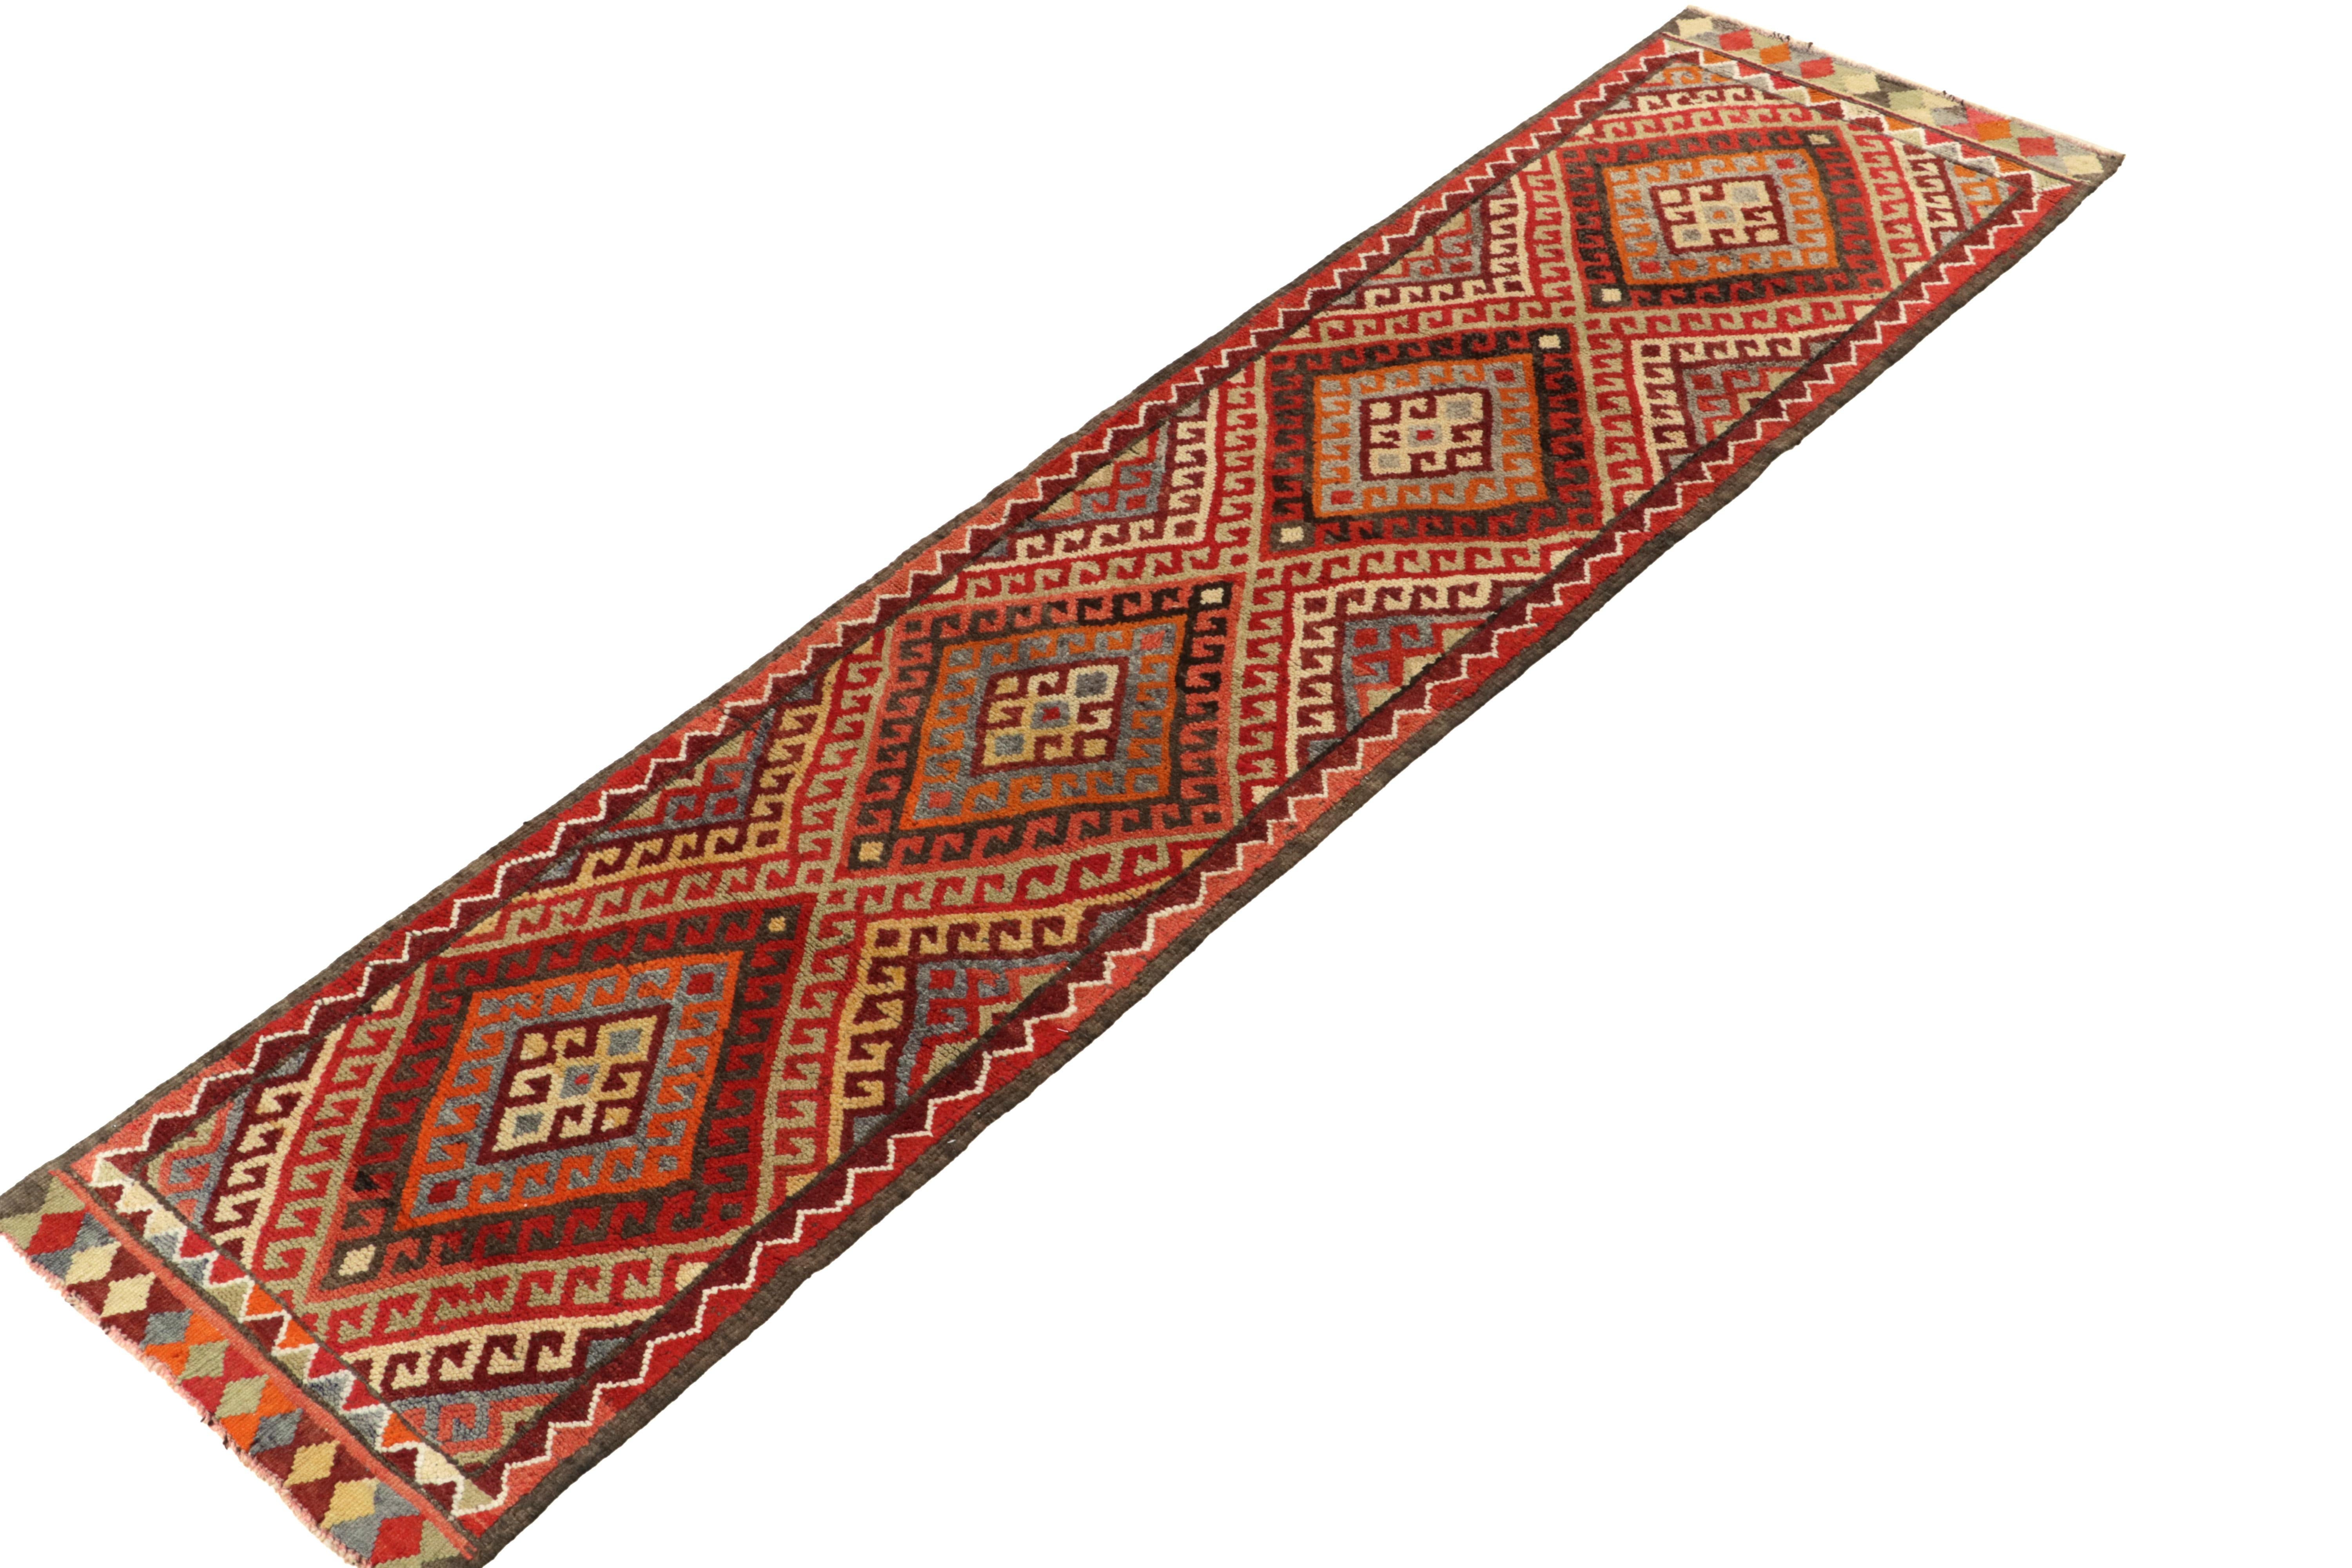 Hand-knotted in wool, a 3x11 runner from Rug & Kilim’s prized new curation of rare tribal rugs.

Originating from Turkey circa 1950-1960, the drawing relishes a symmetric diamond pattern with traditional latch hooks in rich orange, beige-brown,